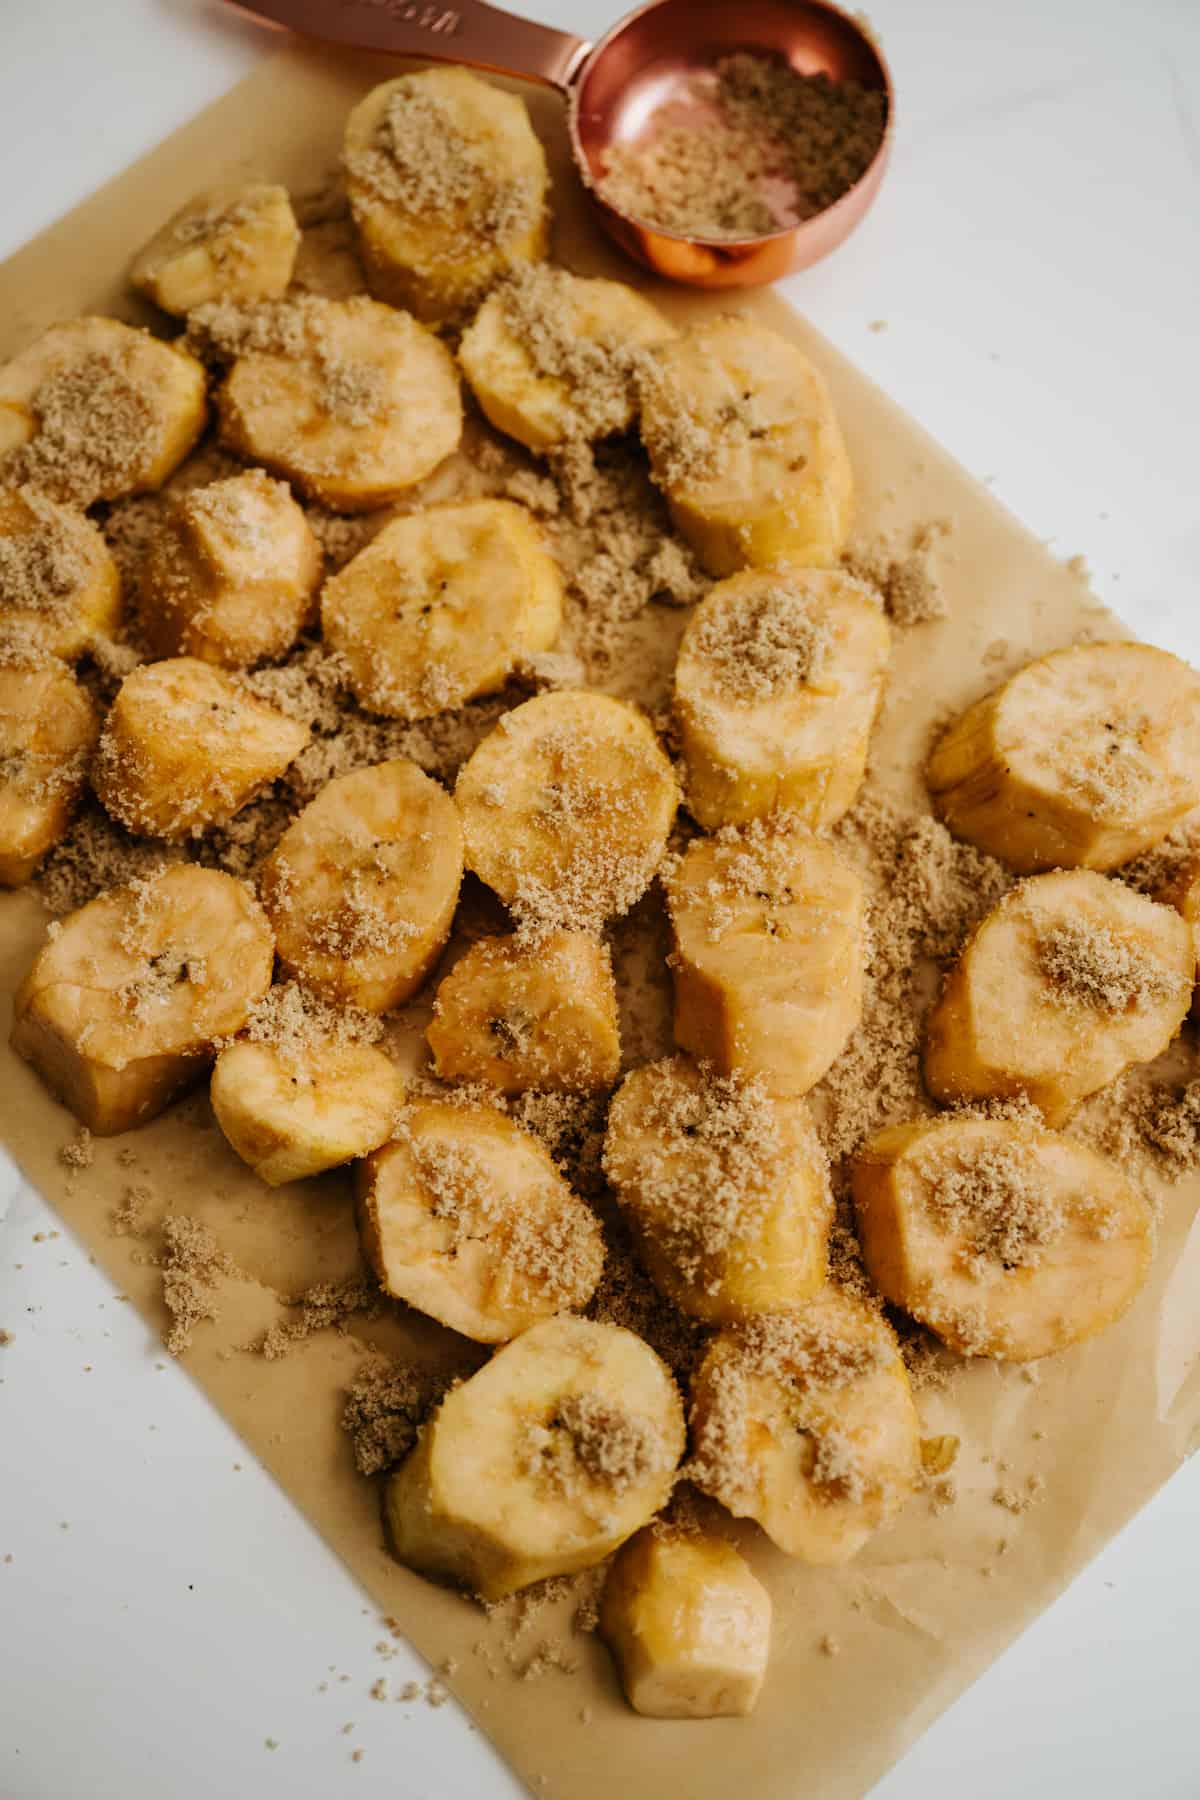 sliced plantains sprinkled with brown sugar on a piece of parchment.